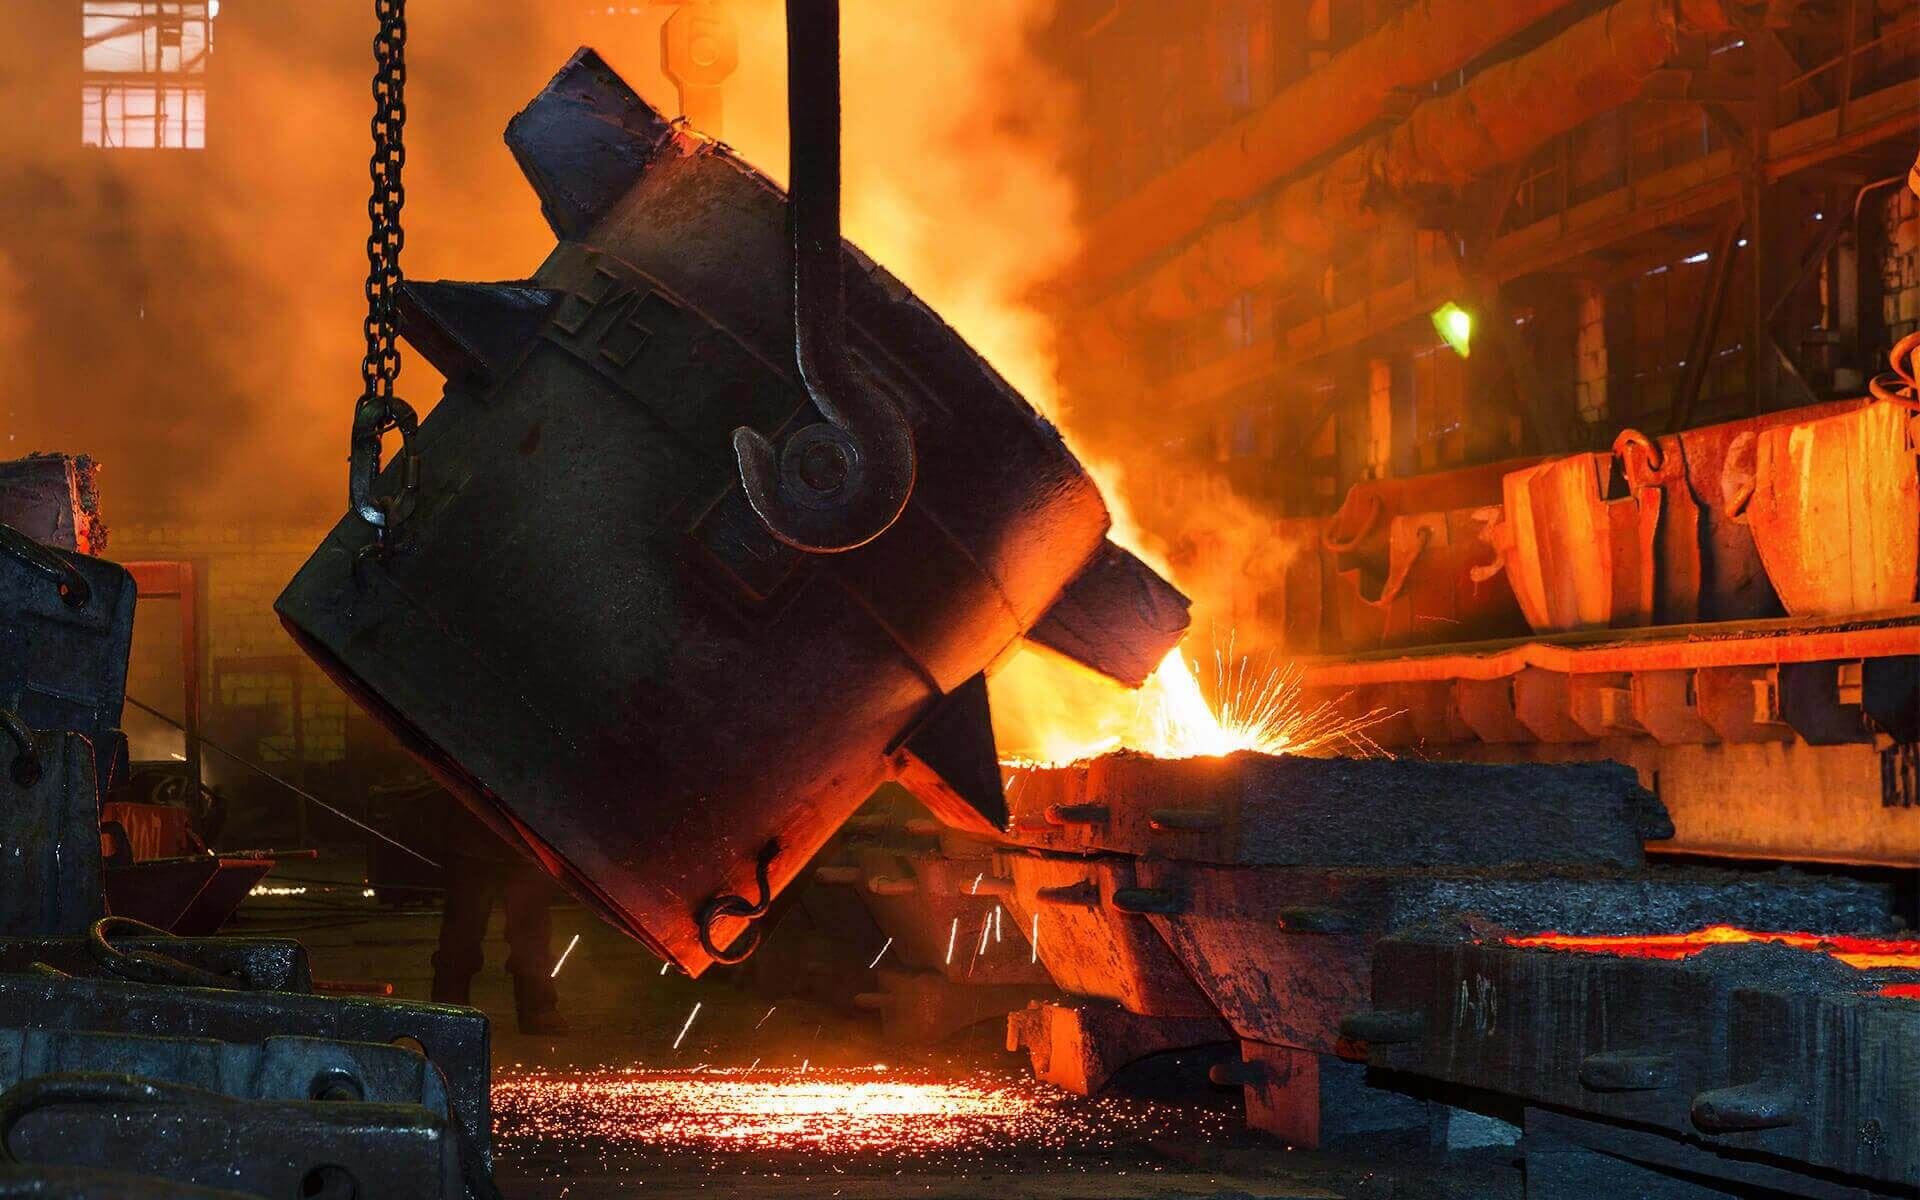 Iran's steel production sees 13% dip in September; Global steel output trends revealed